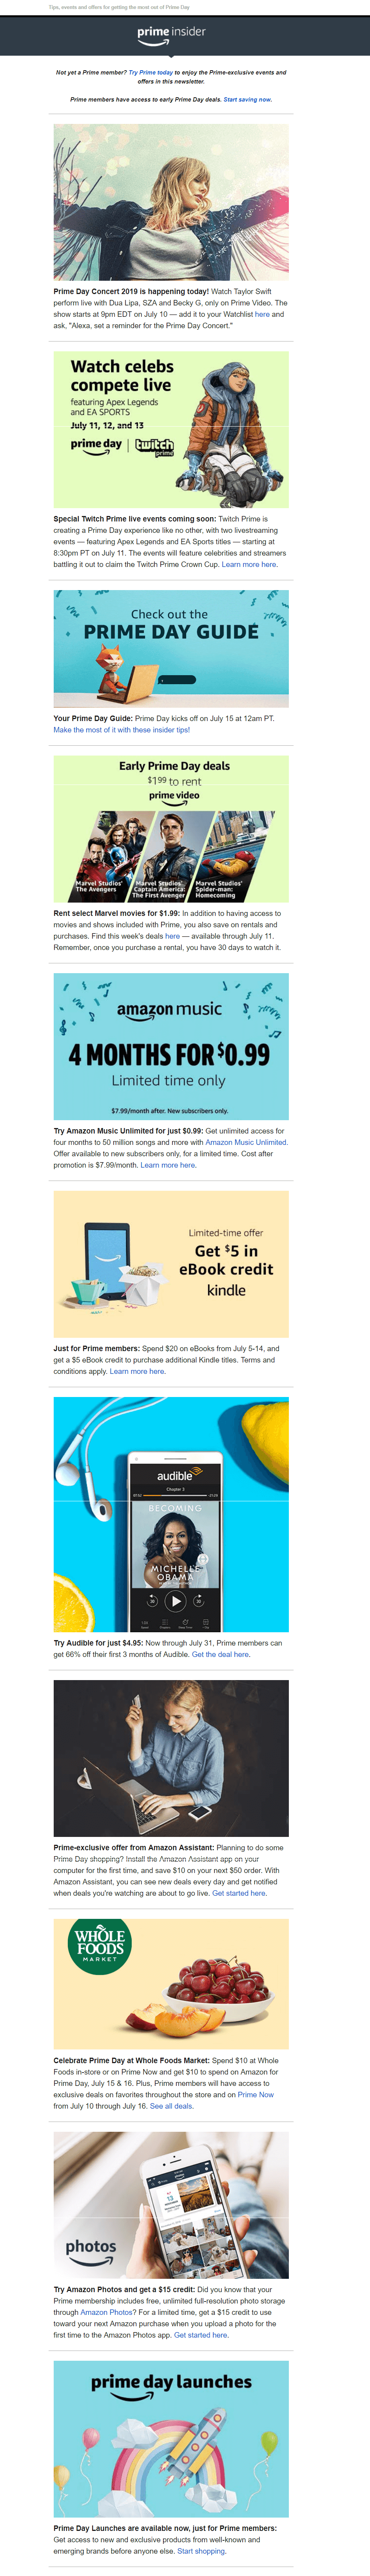 Prime insider email example